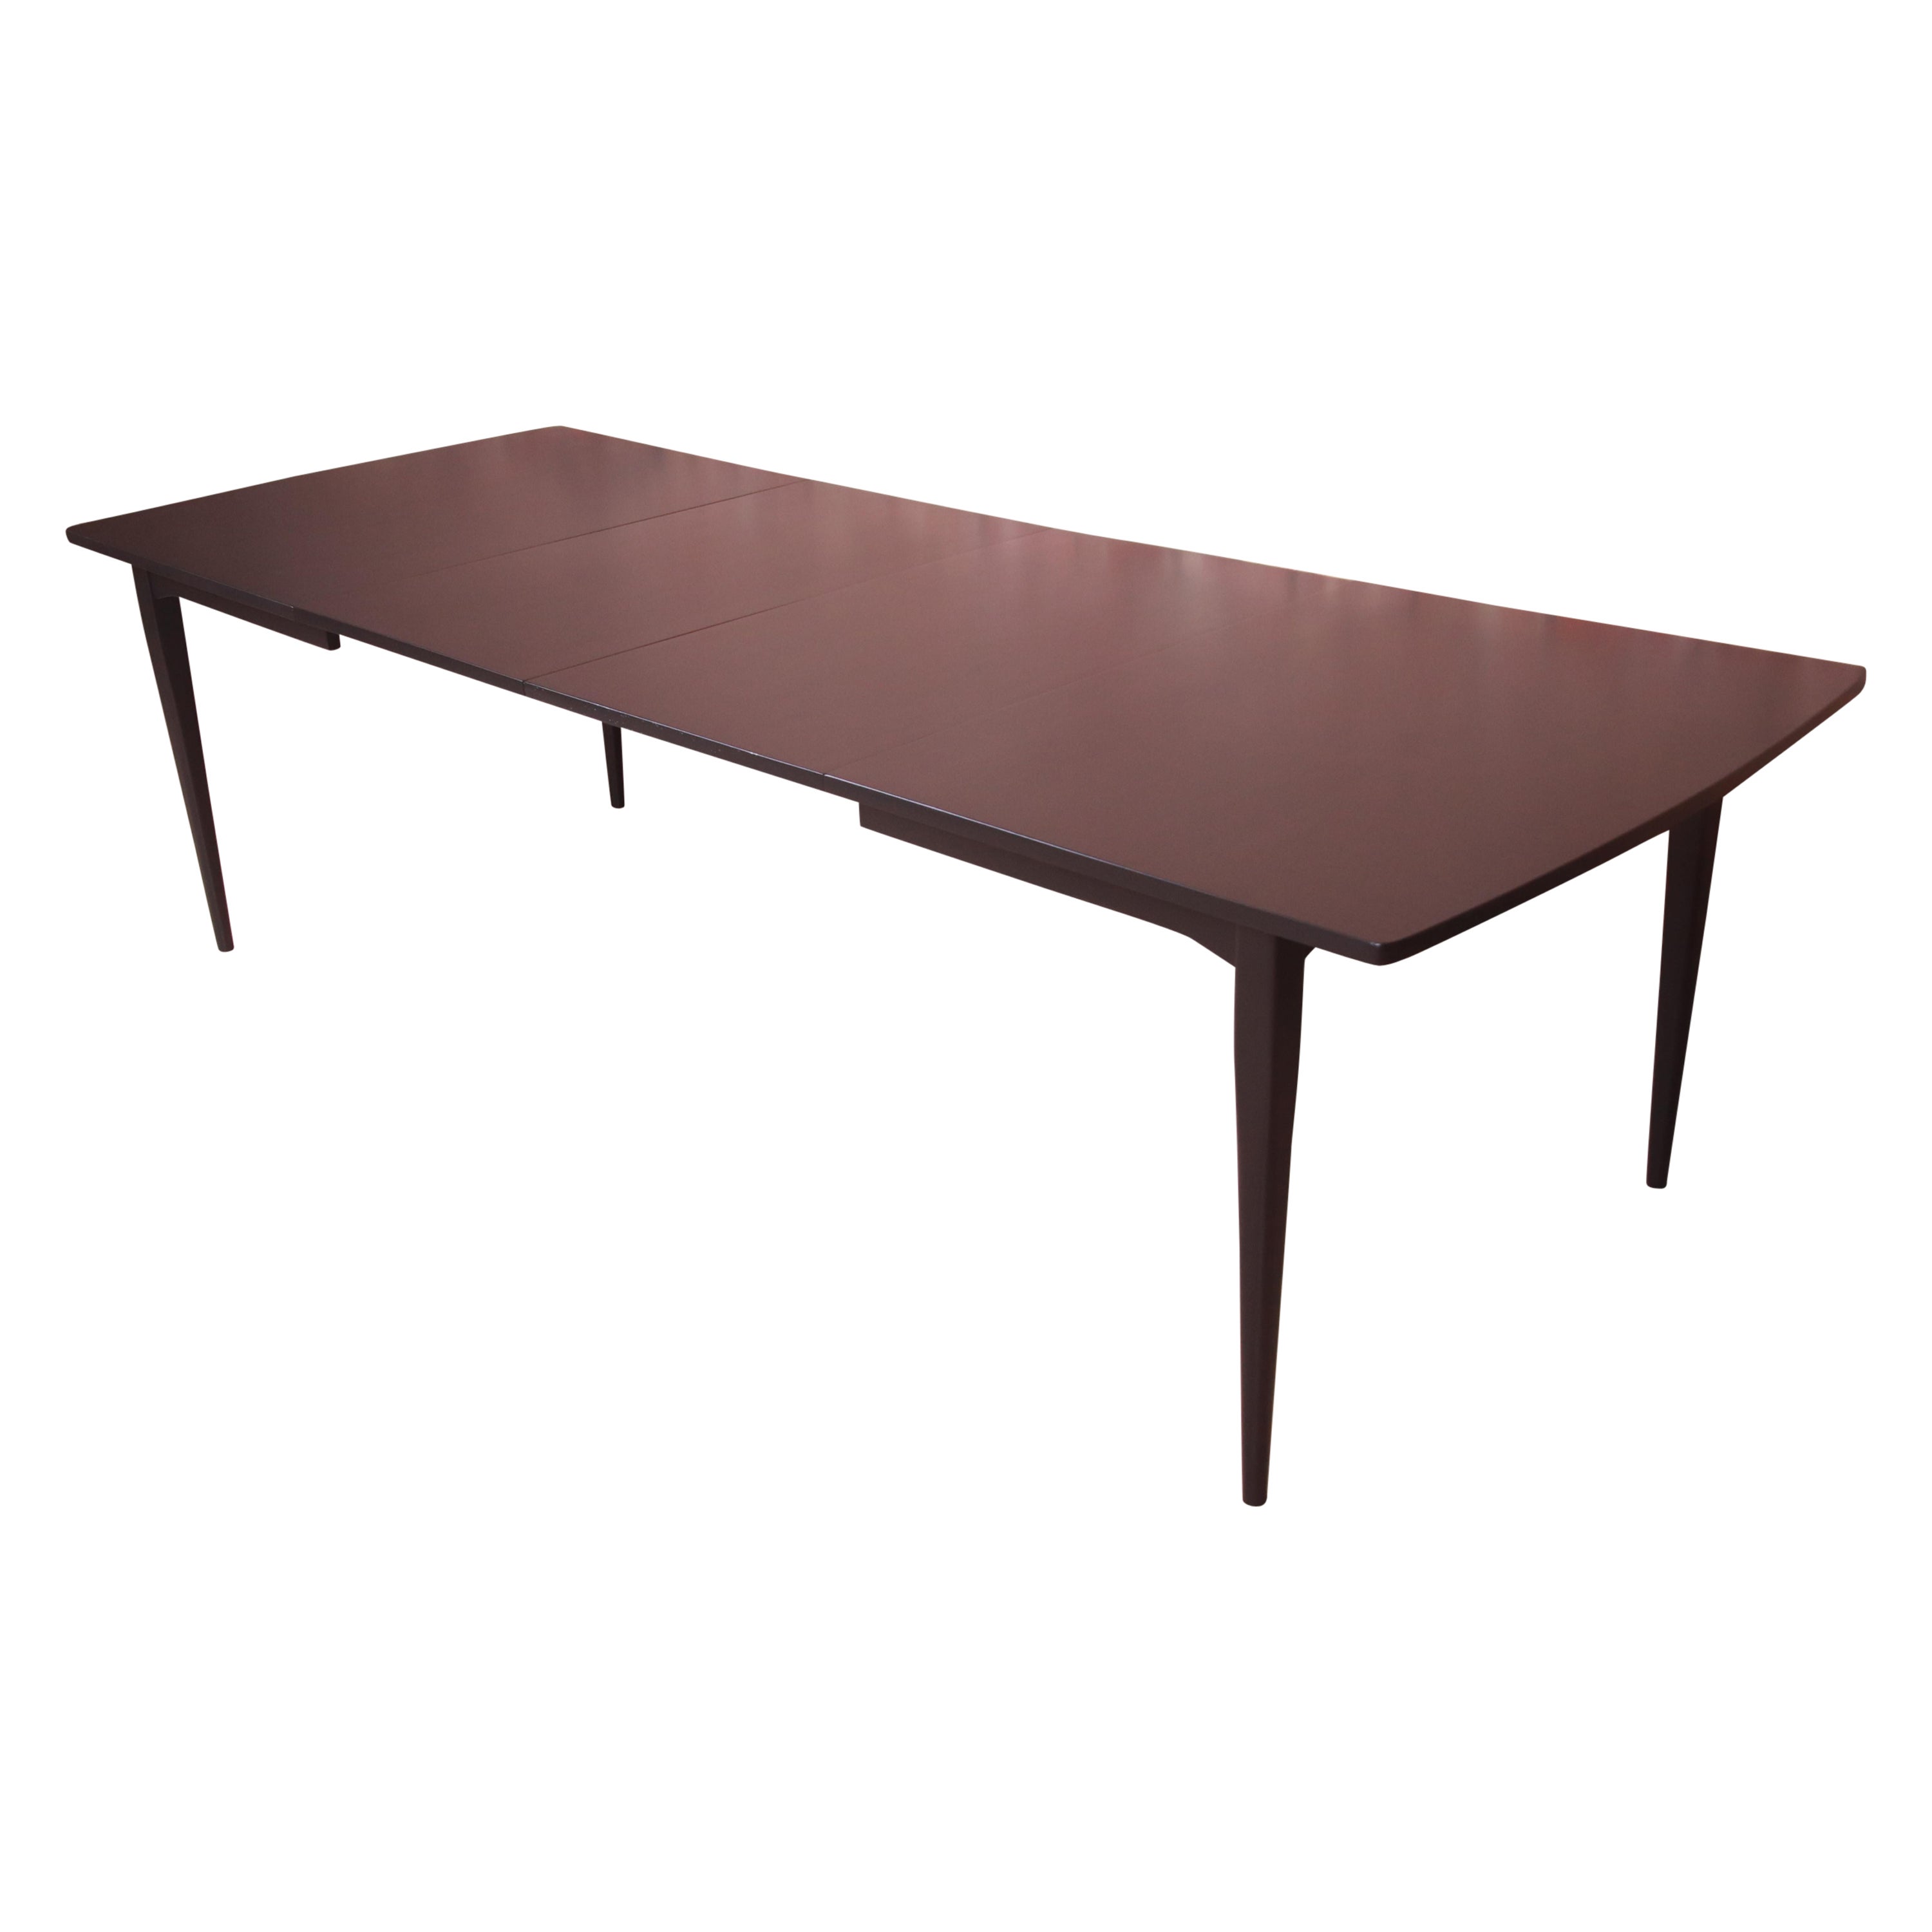 Kipp Stewart for Drexel Declaration Black Lacquered Dining Table, Refinished